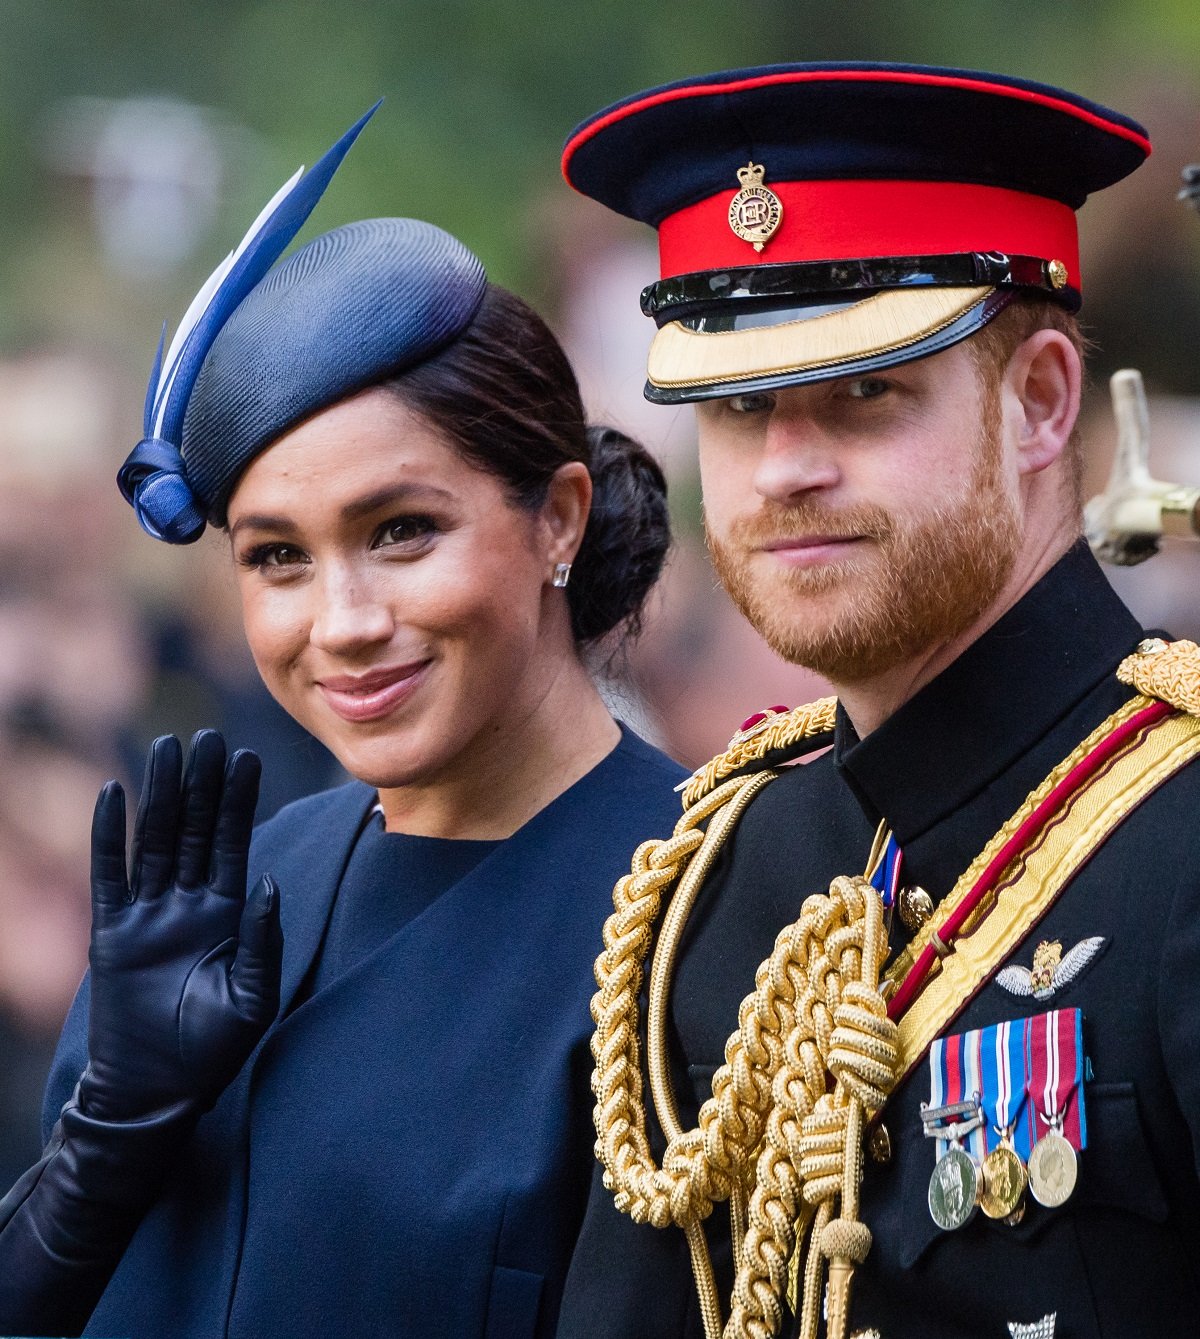 Prince Harry, Duke of Sussex and Meghan, Duchess of Sussex, ride by carriage down the Mall during Trooping The Colour, the Queen's annual birthday parade, on June 08, 2019 in London, England